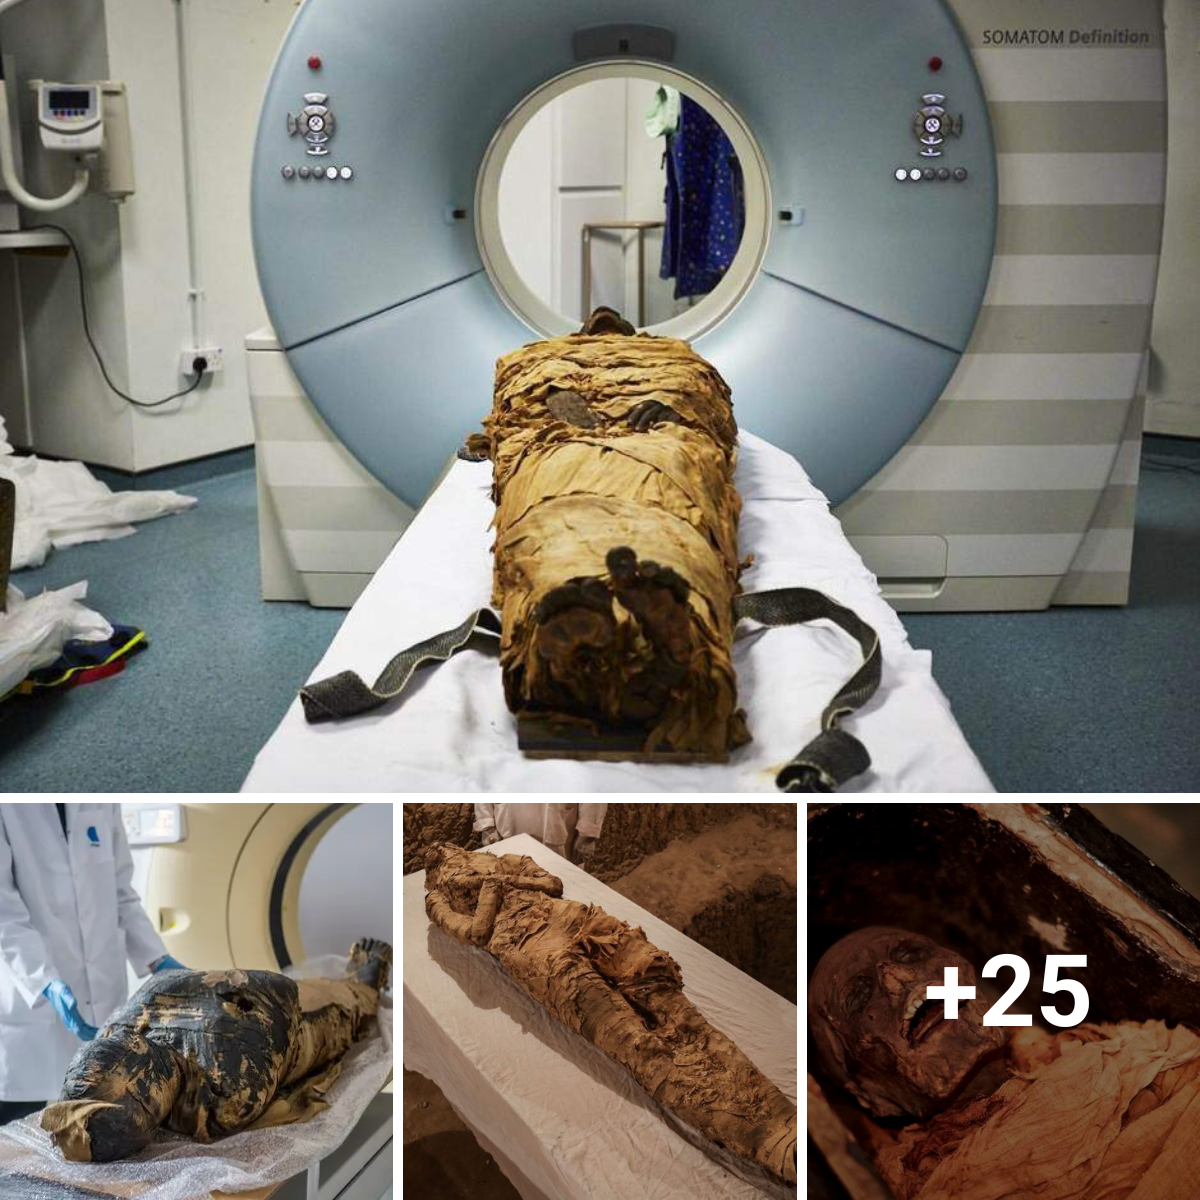 For the first time in 3,000 years, the sound of an Egyptian mummy was heard again.